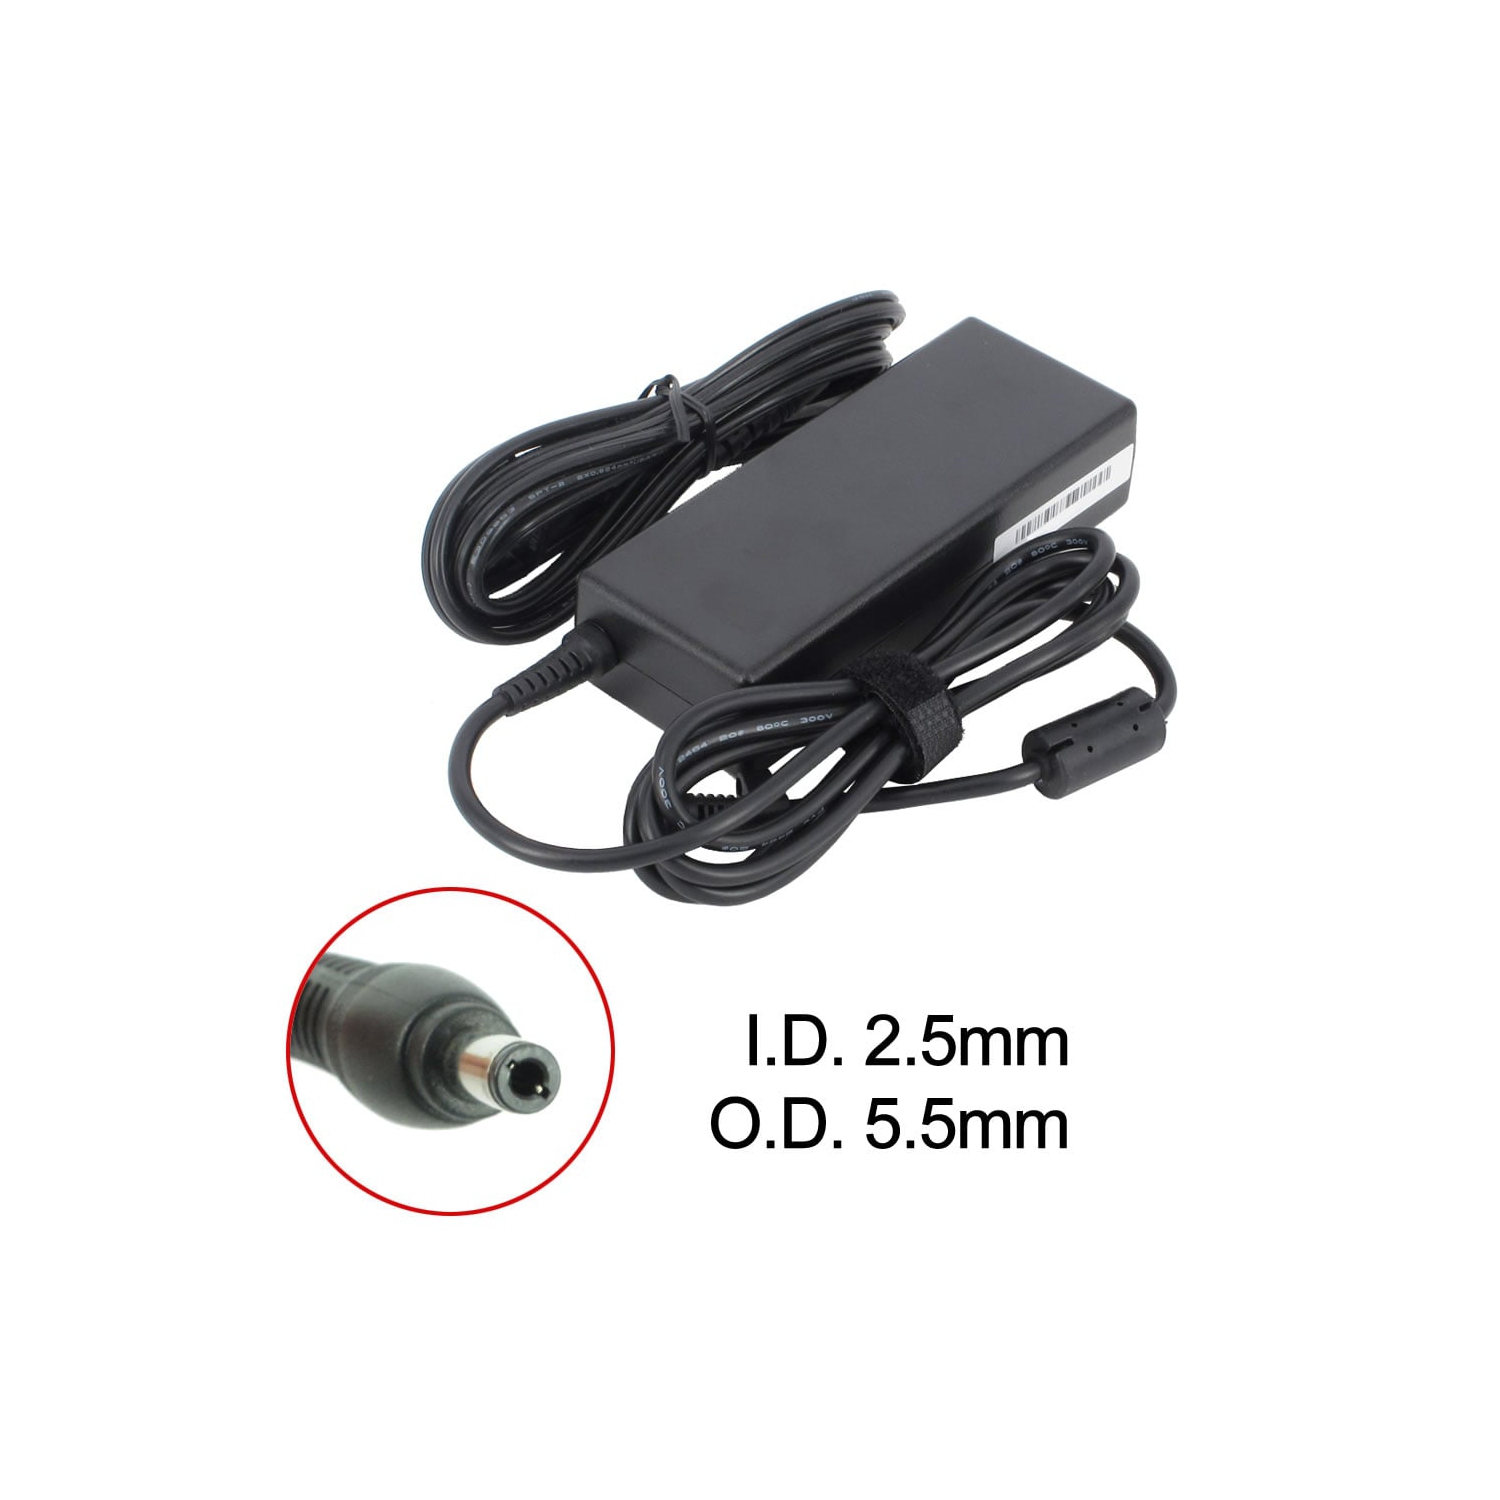 BATTDEPOT New Laptop AC Adapter for NEC LL550/3D 103942 808-875692-010A 9T458 ADP-65 HB BBEF PA-1900-36 SA80-3115